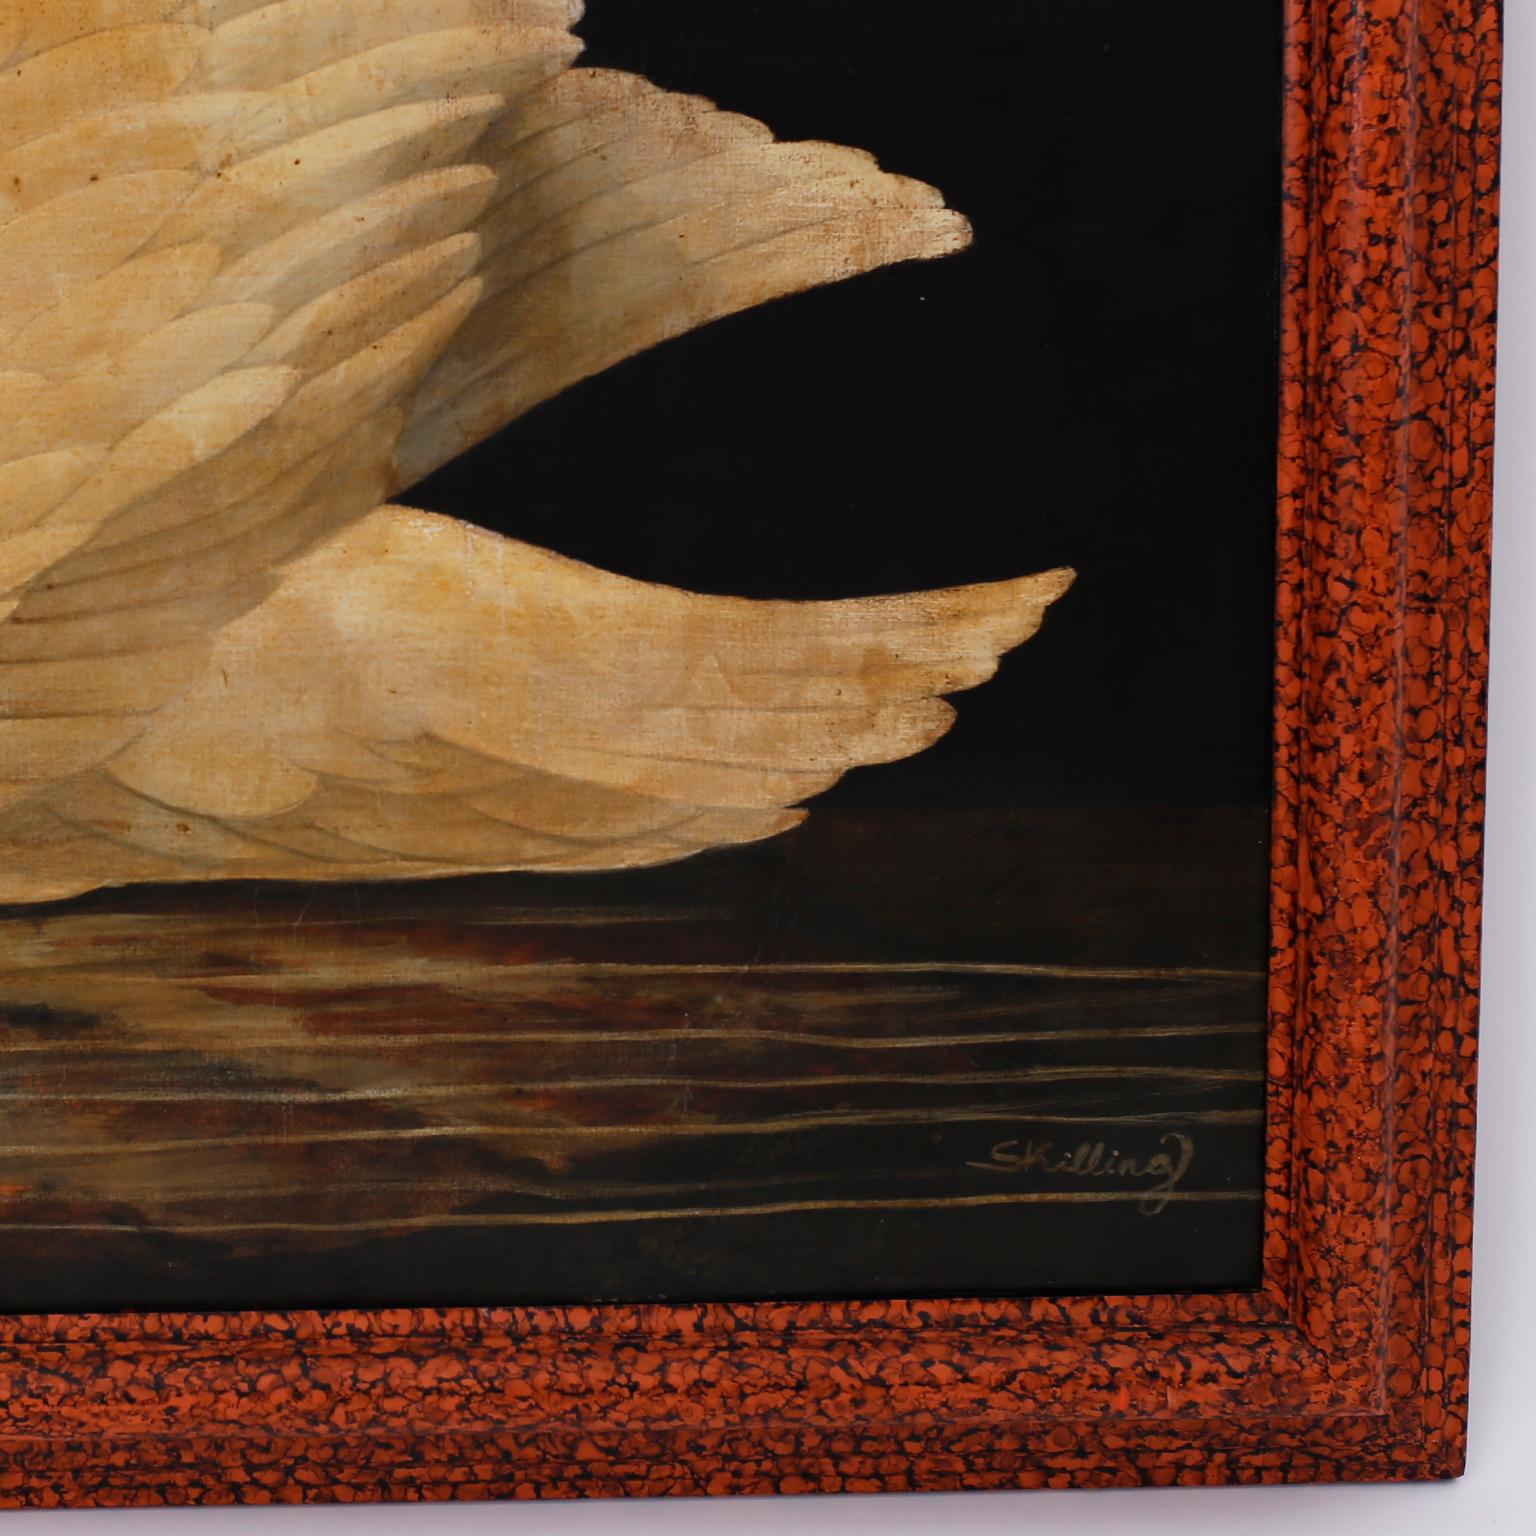 American Swan Oil on Canvas by William Skilling